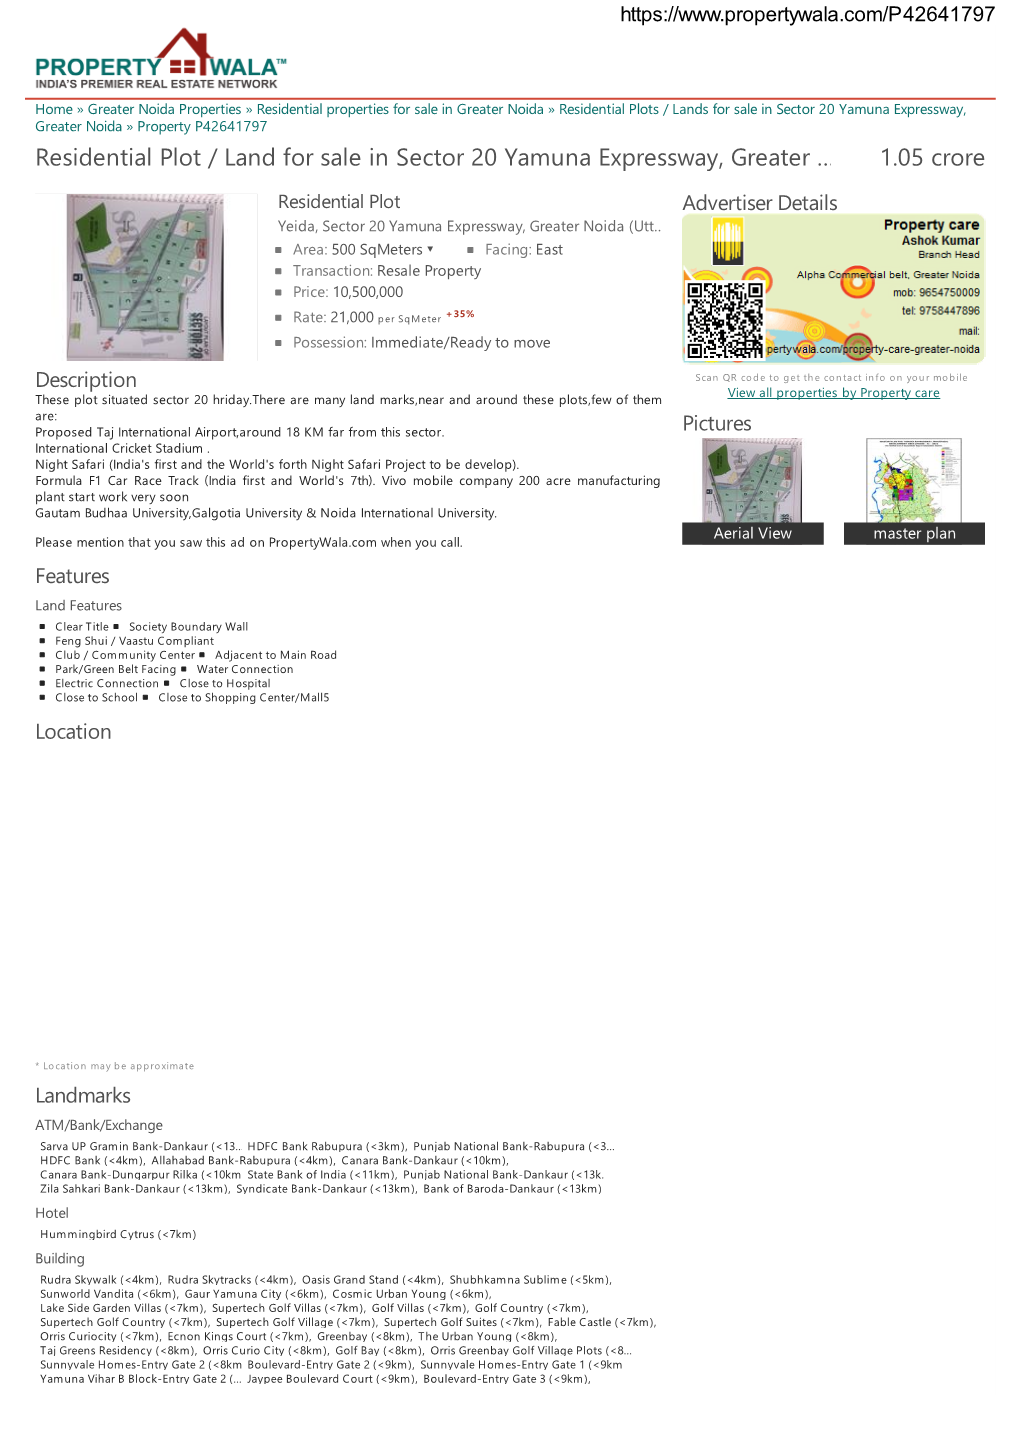 Residential Plot / Land for Sale in Sector 20 Yamuna Expressway